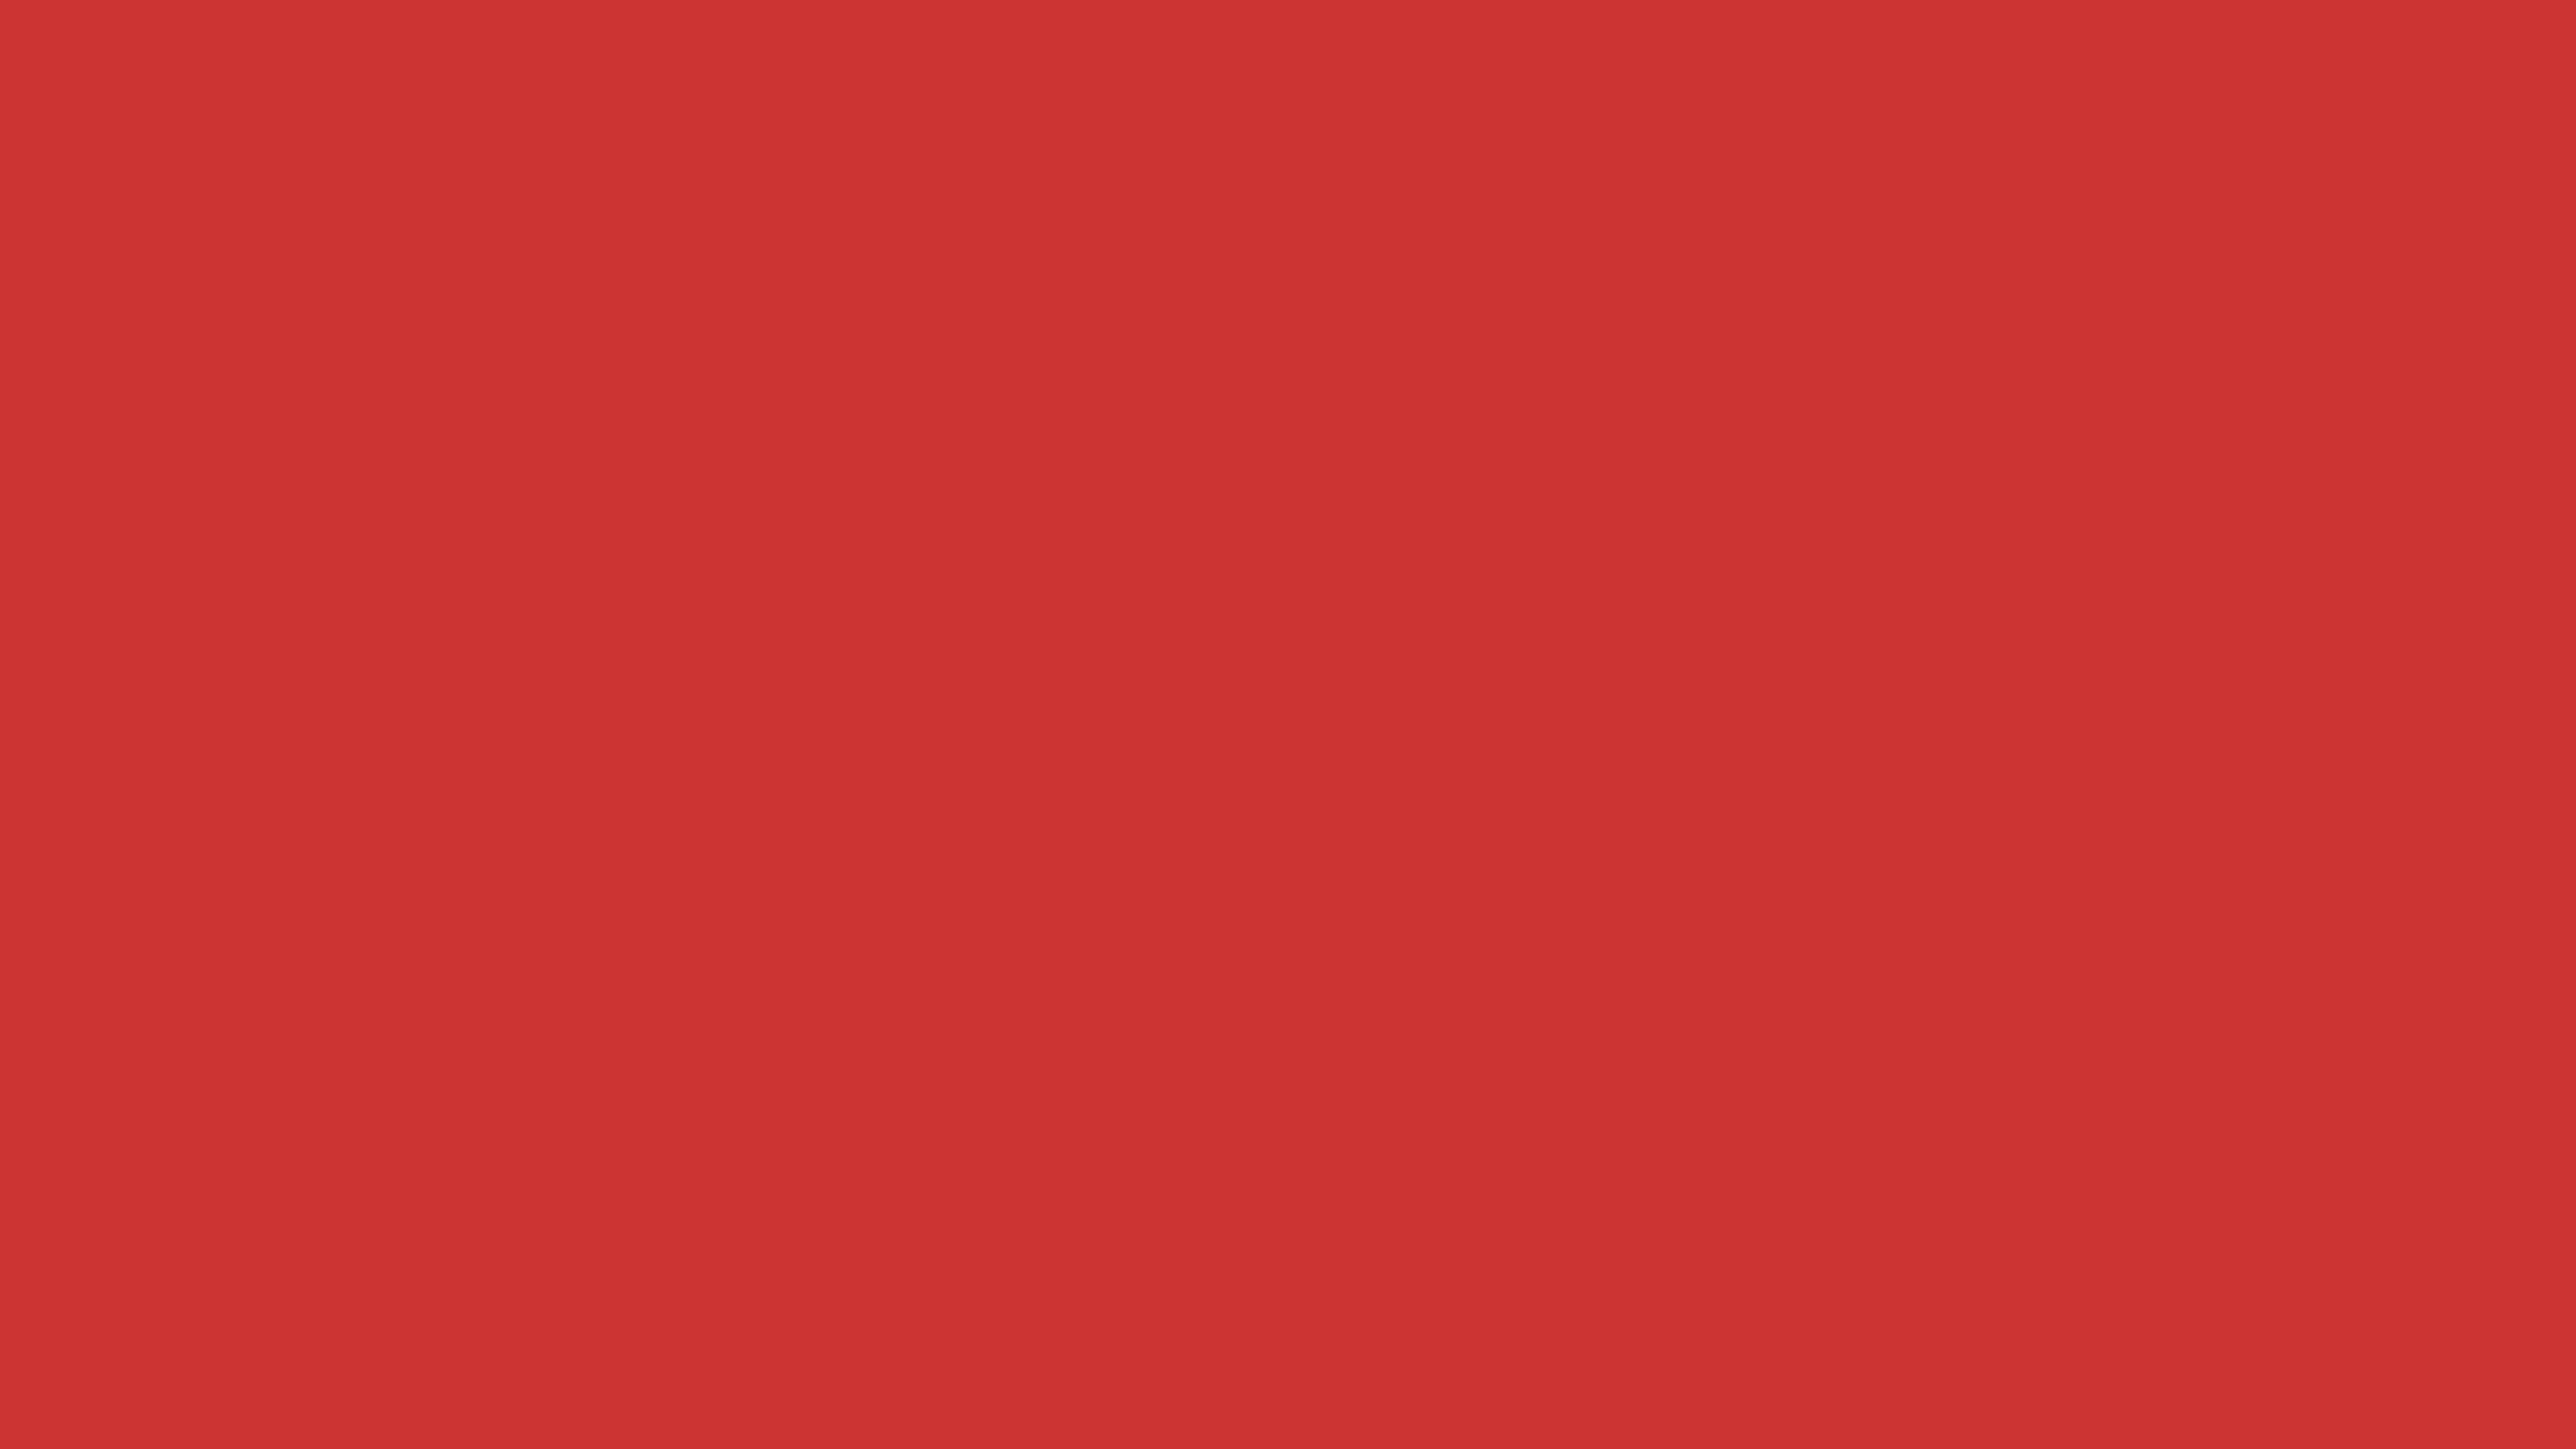 7680x4320 Persian Red Solid Color Background